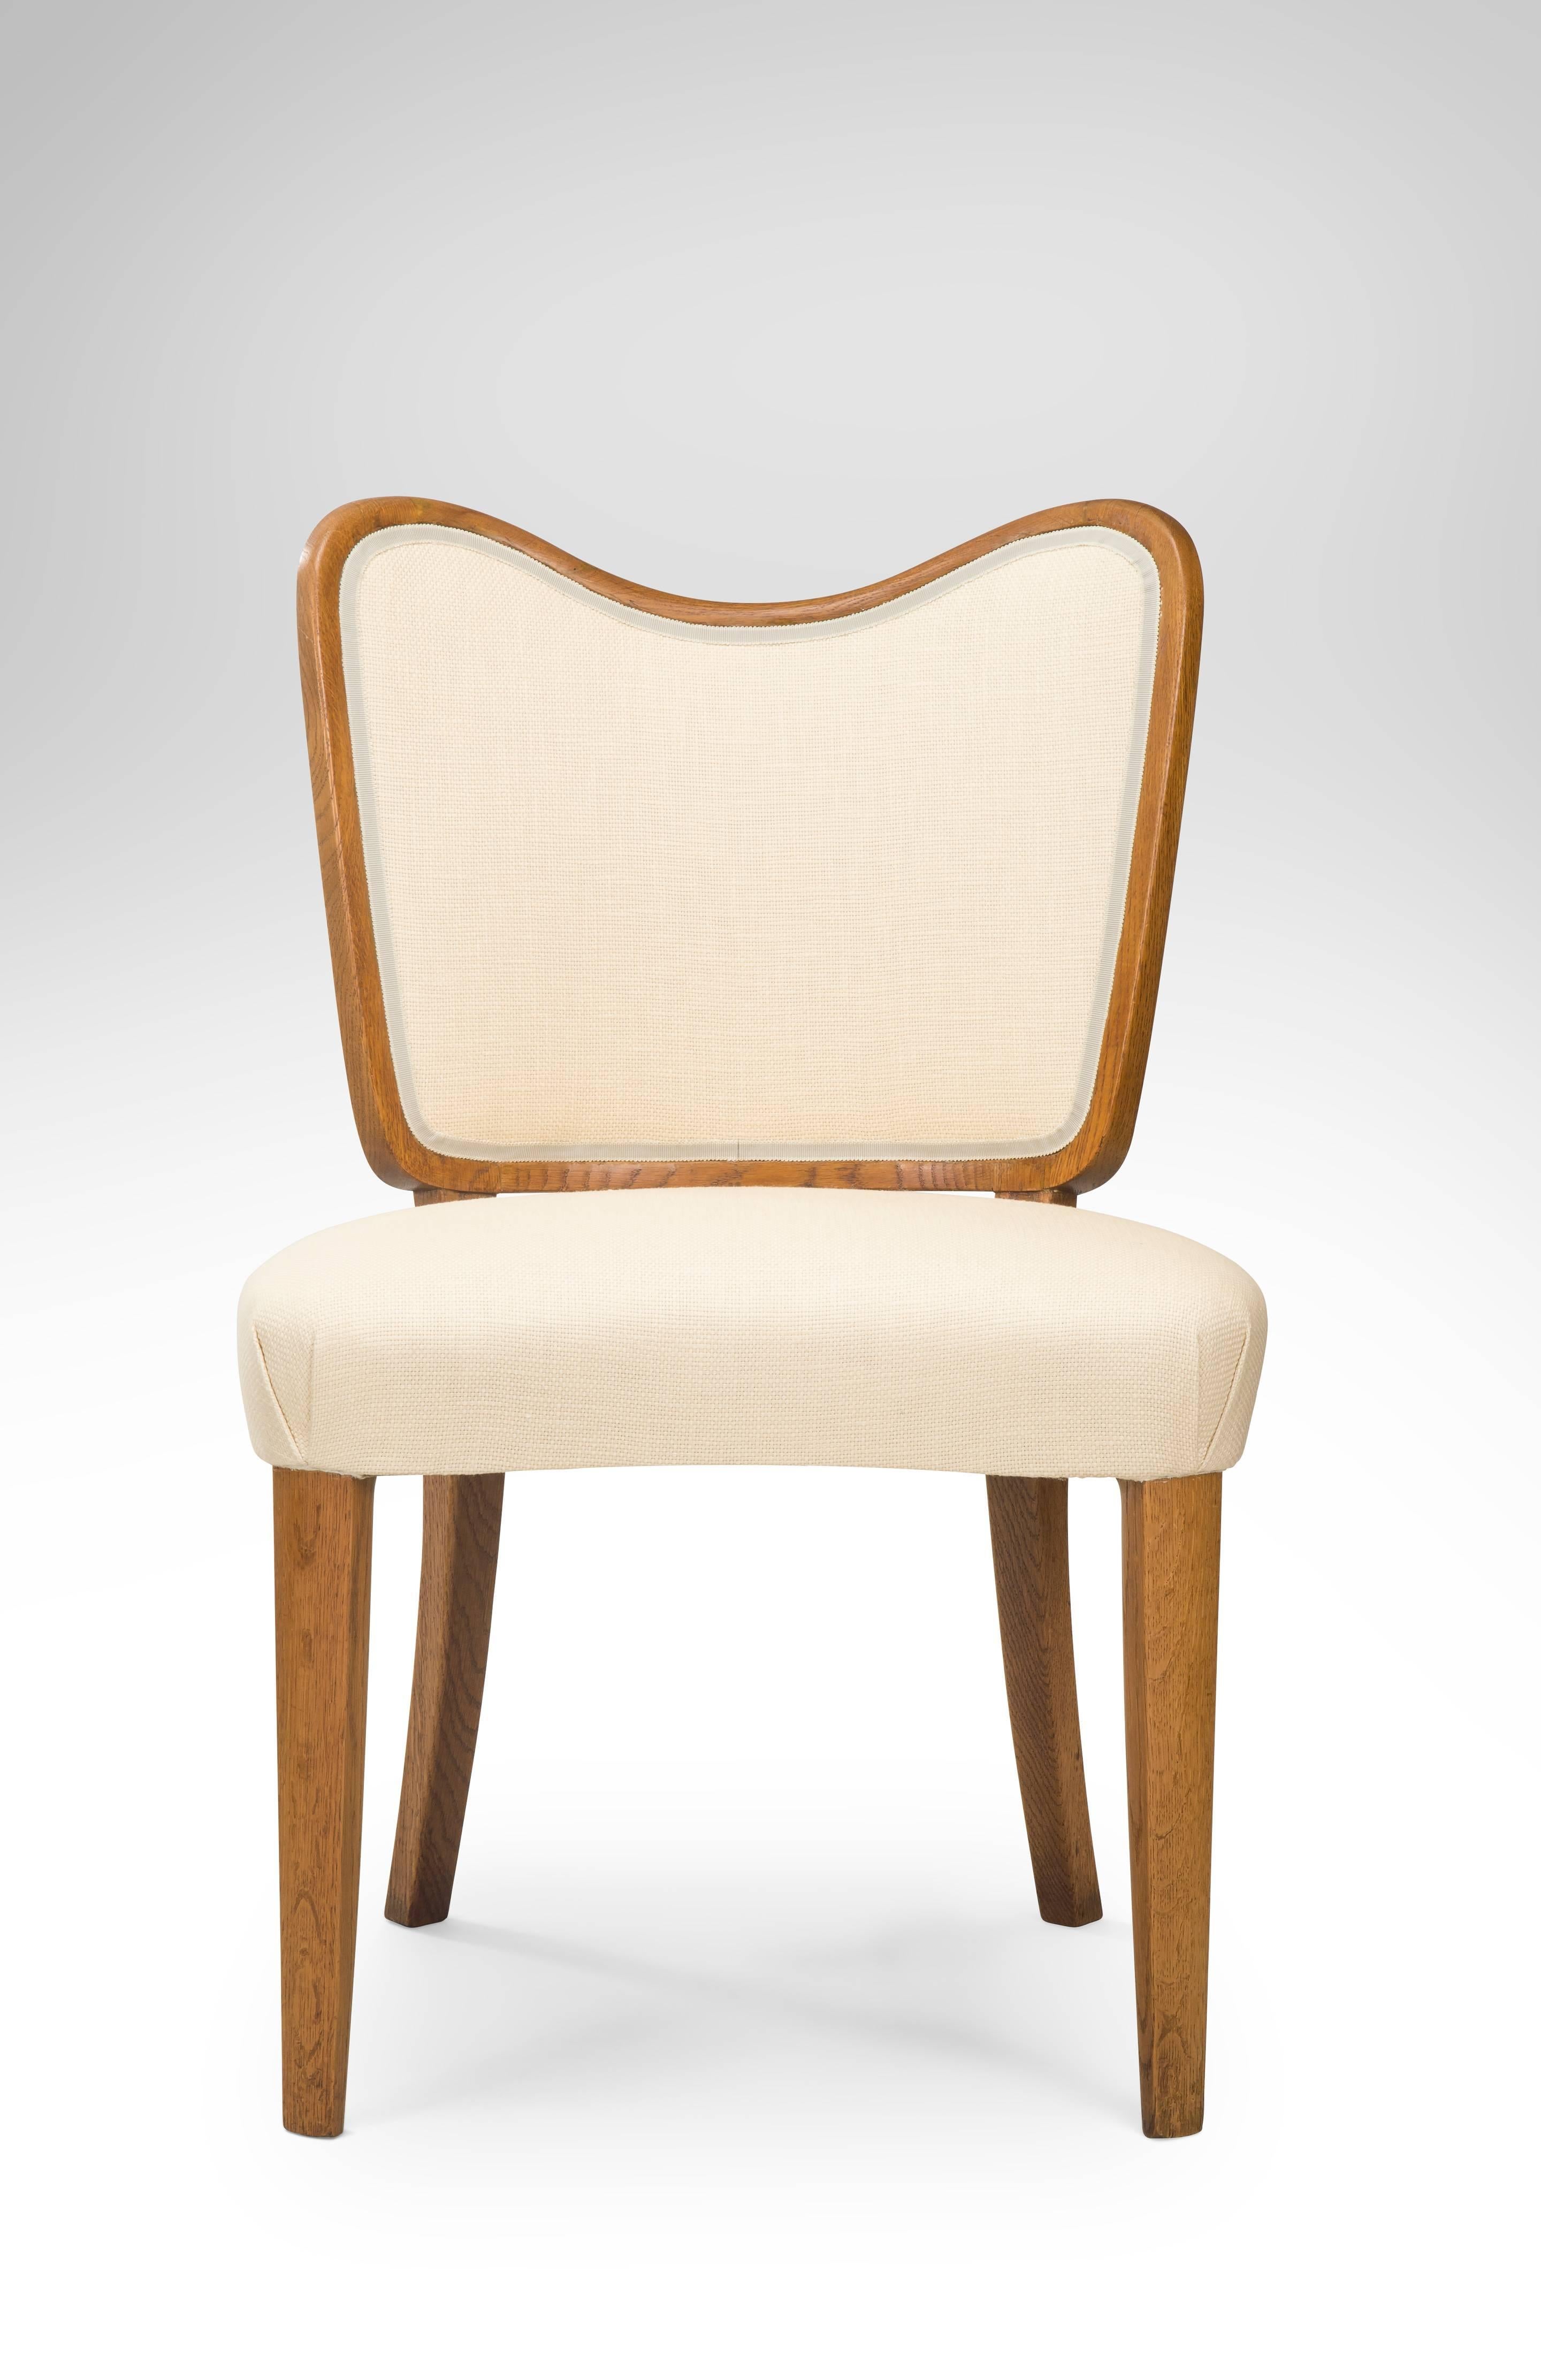 Rare examples in a lustrous golden oak of the renowned designer's later work where he briefly had his own firm. Stylish and very comfortable. Each with a curvaceous backrest above an similarly shaped and upholstered seat, on tapering legs. Stamped: